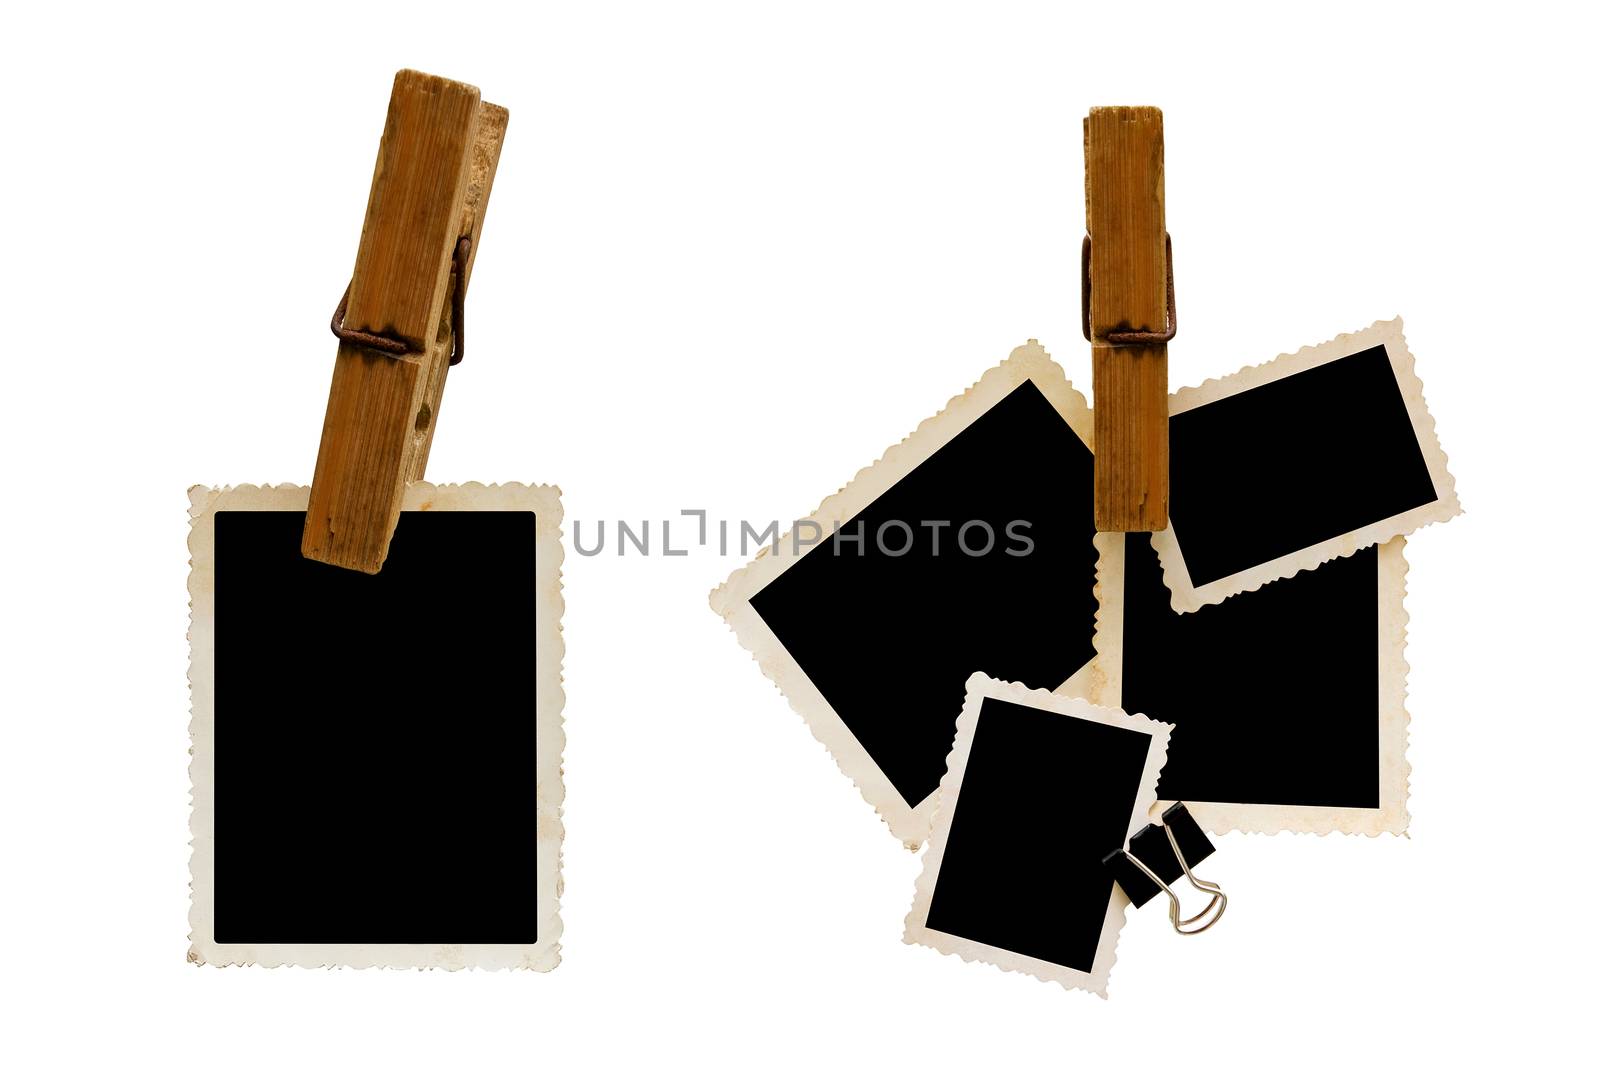 Hanging aged photo frames on white background by myyaym